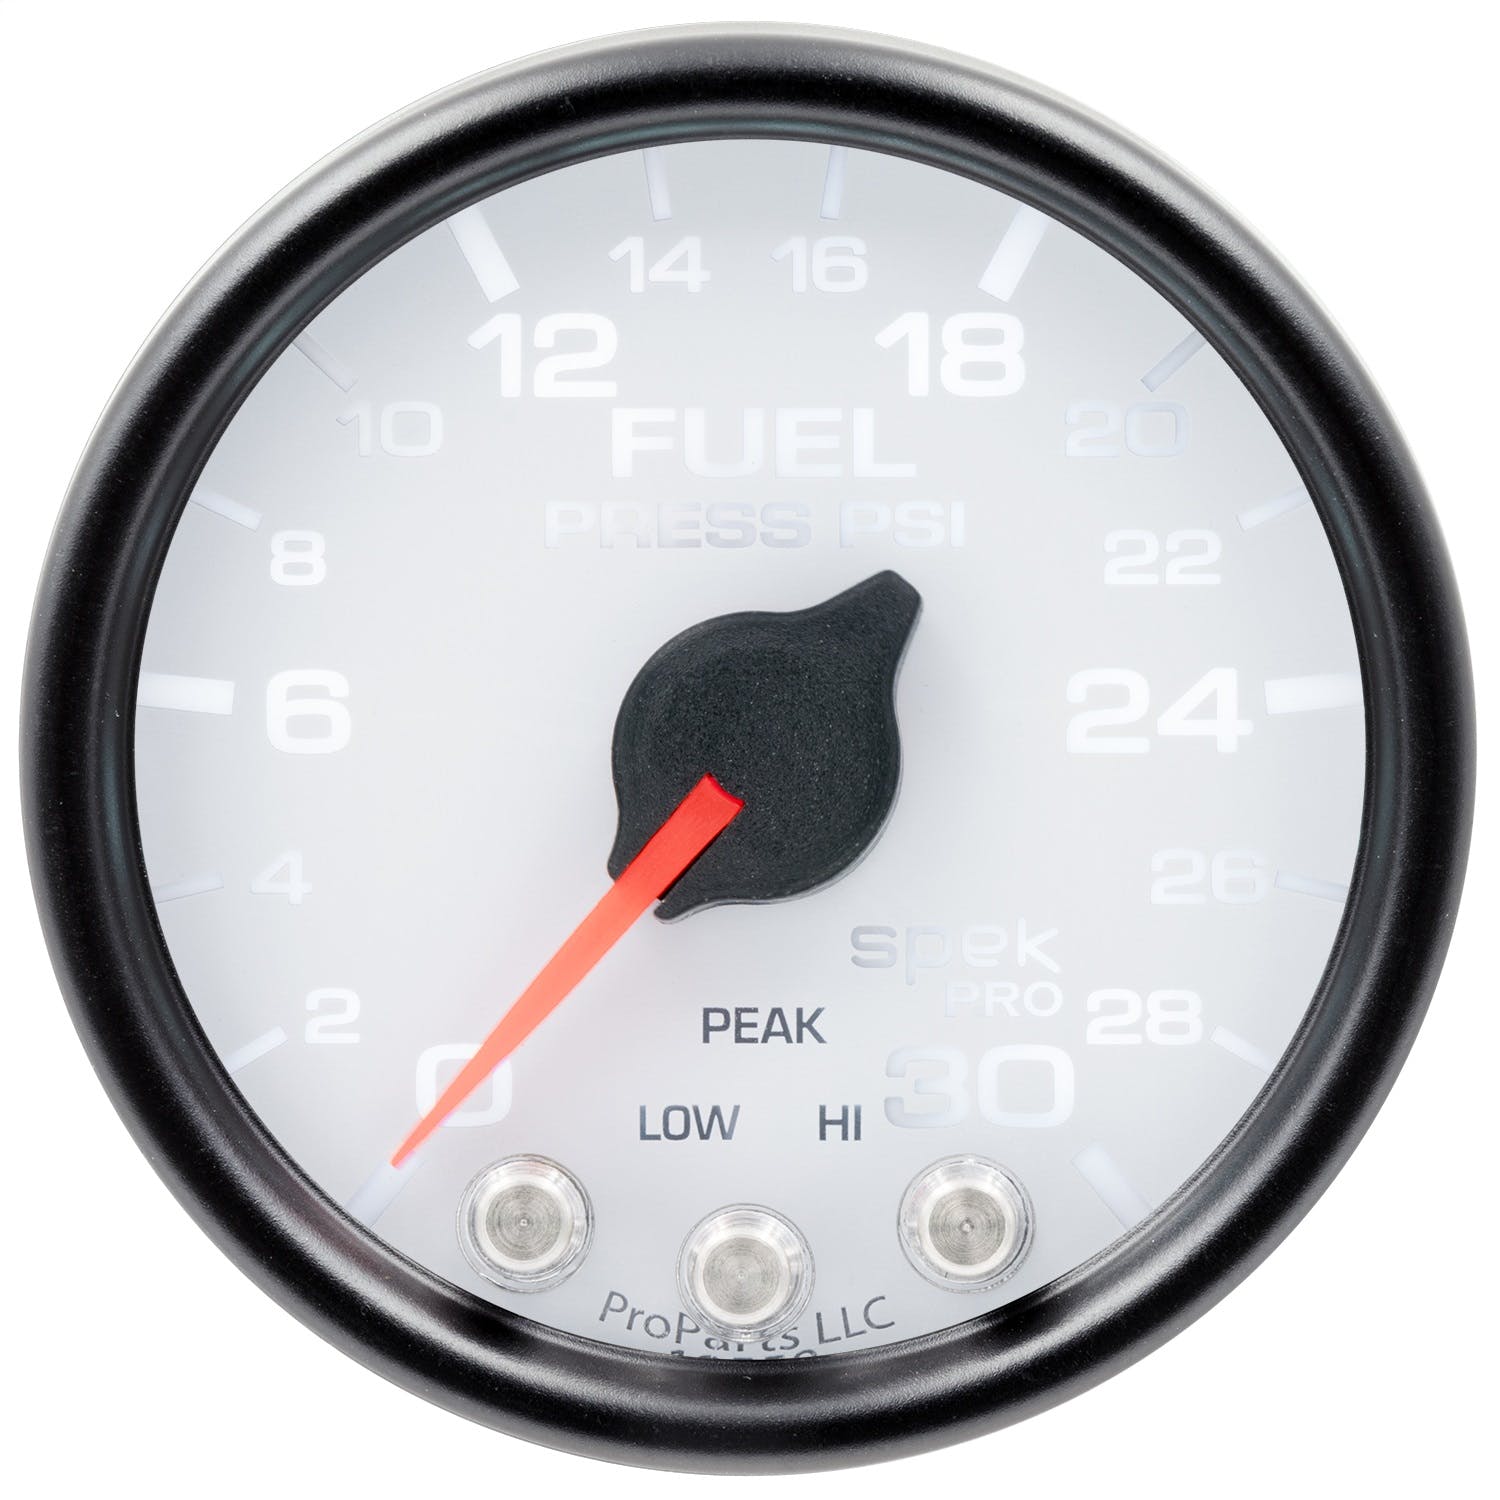 AutoMeter Products P31612 Fuel Pressure Gauge, 2 116, 30PSI, Stepper Motor White